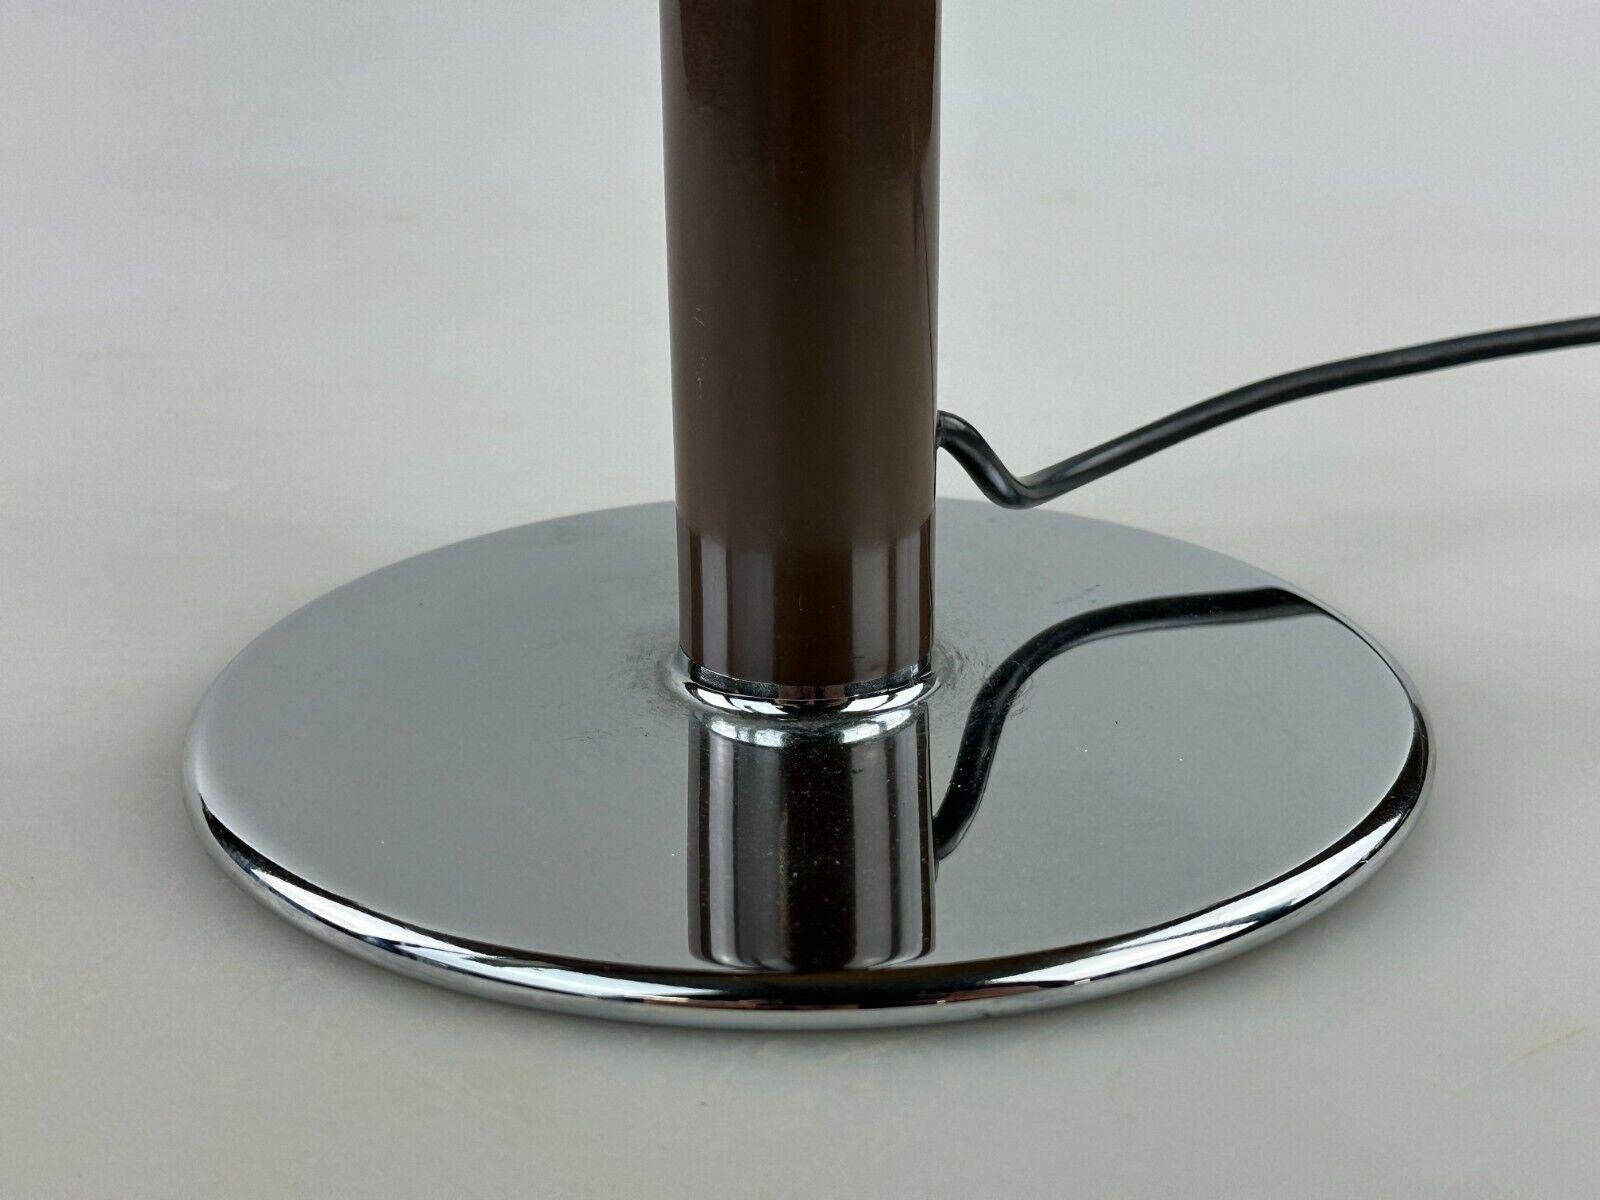 60s 70s table lamp Ingo Maurer Gulp tube lamp chrome metal Space Age In Good Condition For Sale In Neuenkirchen, NI